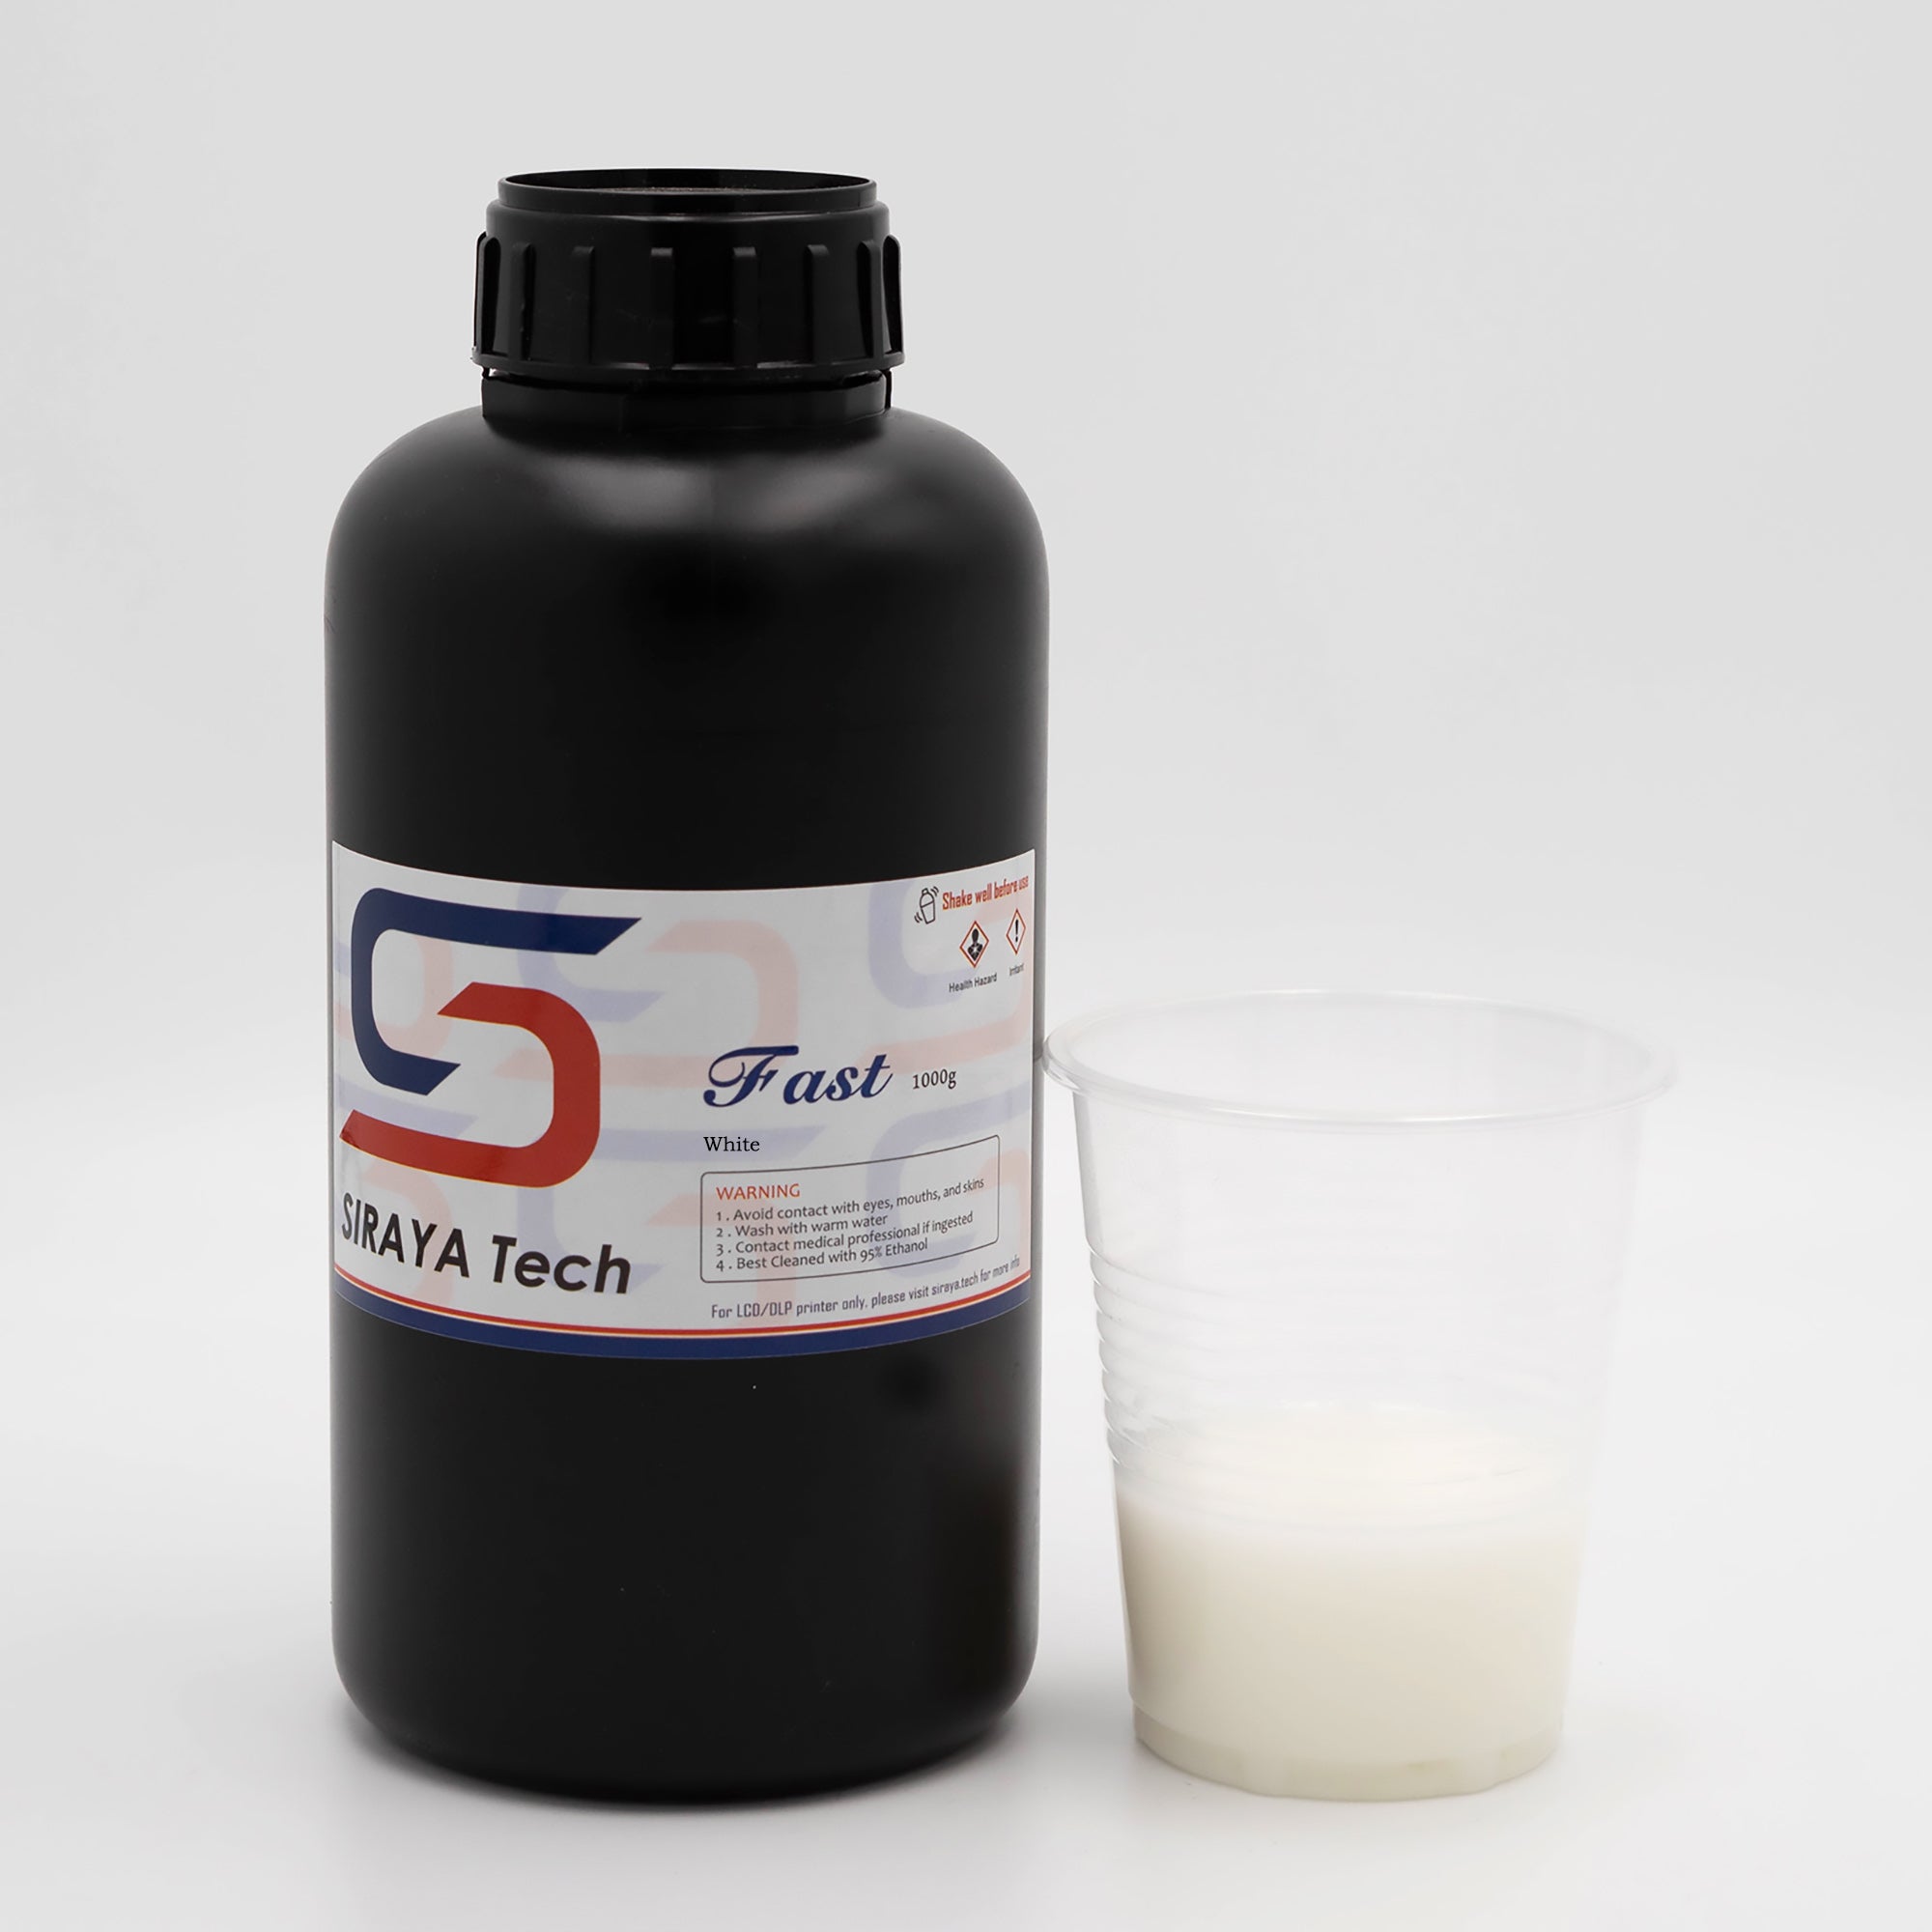 ABS-Like Fast White by Siraya Tech (1kg for NZ)